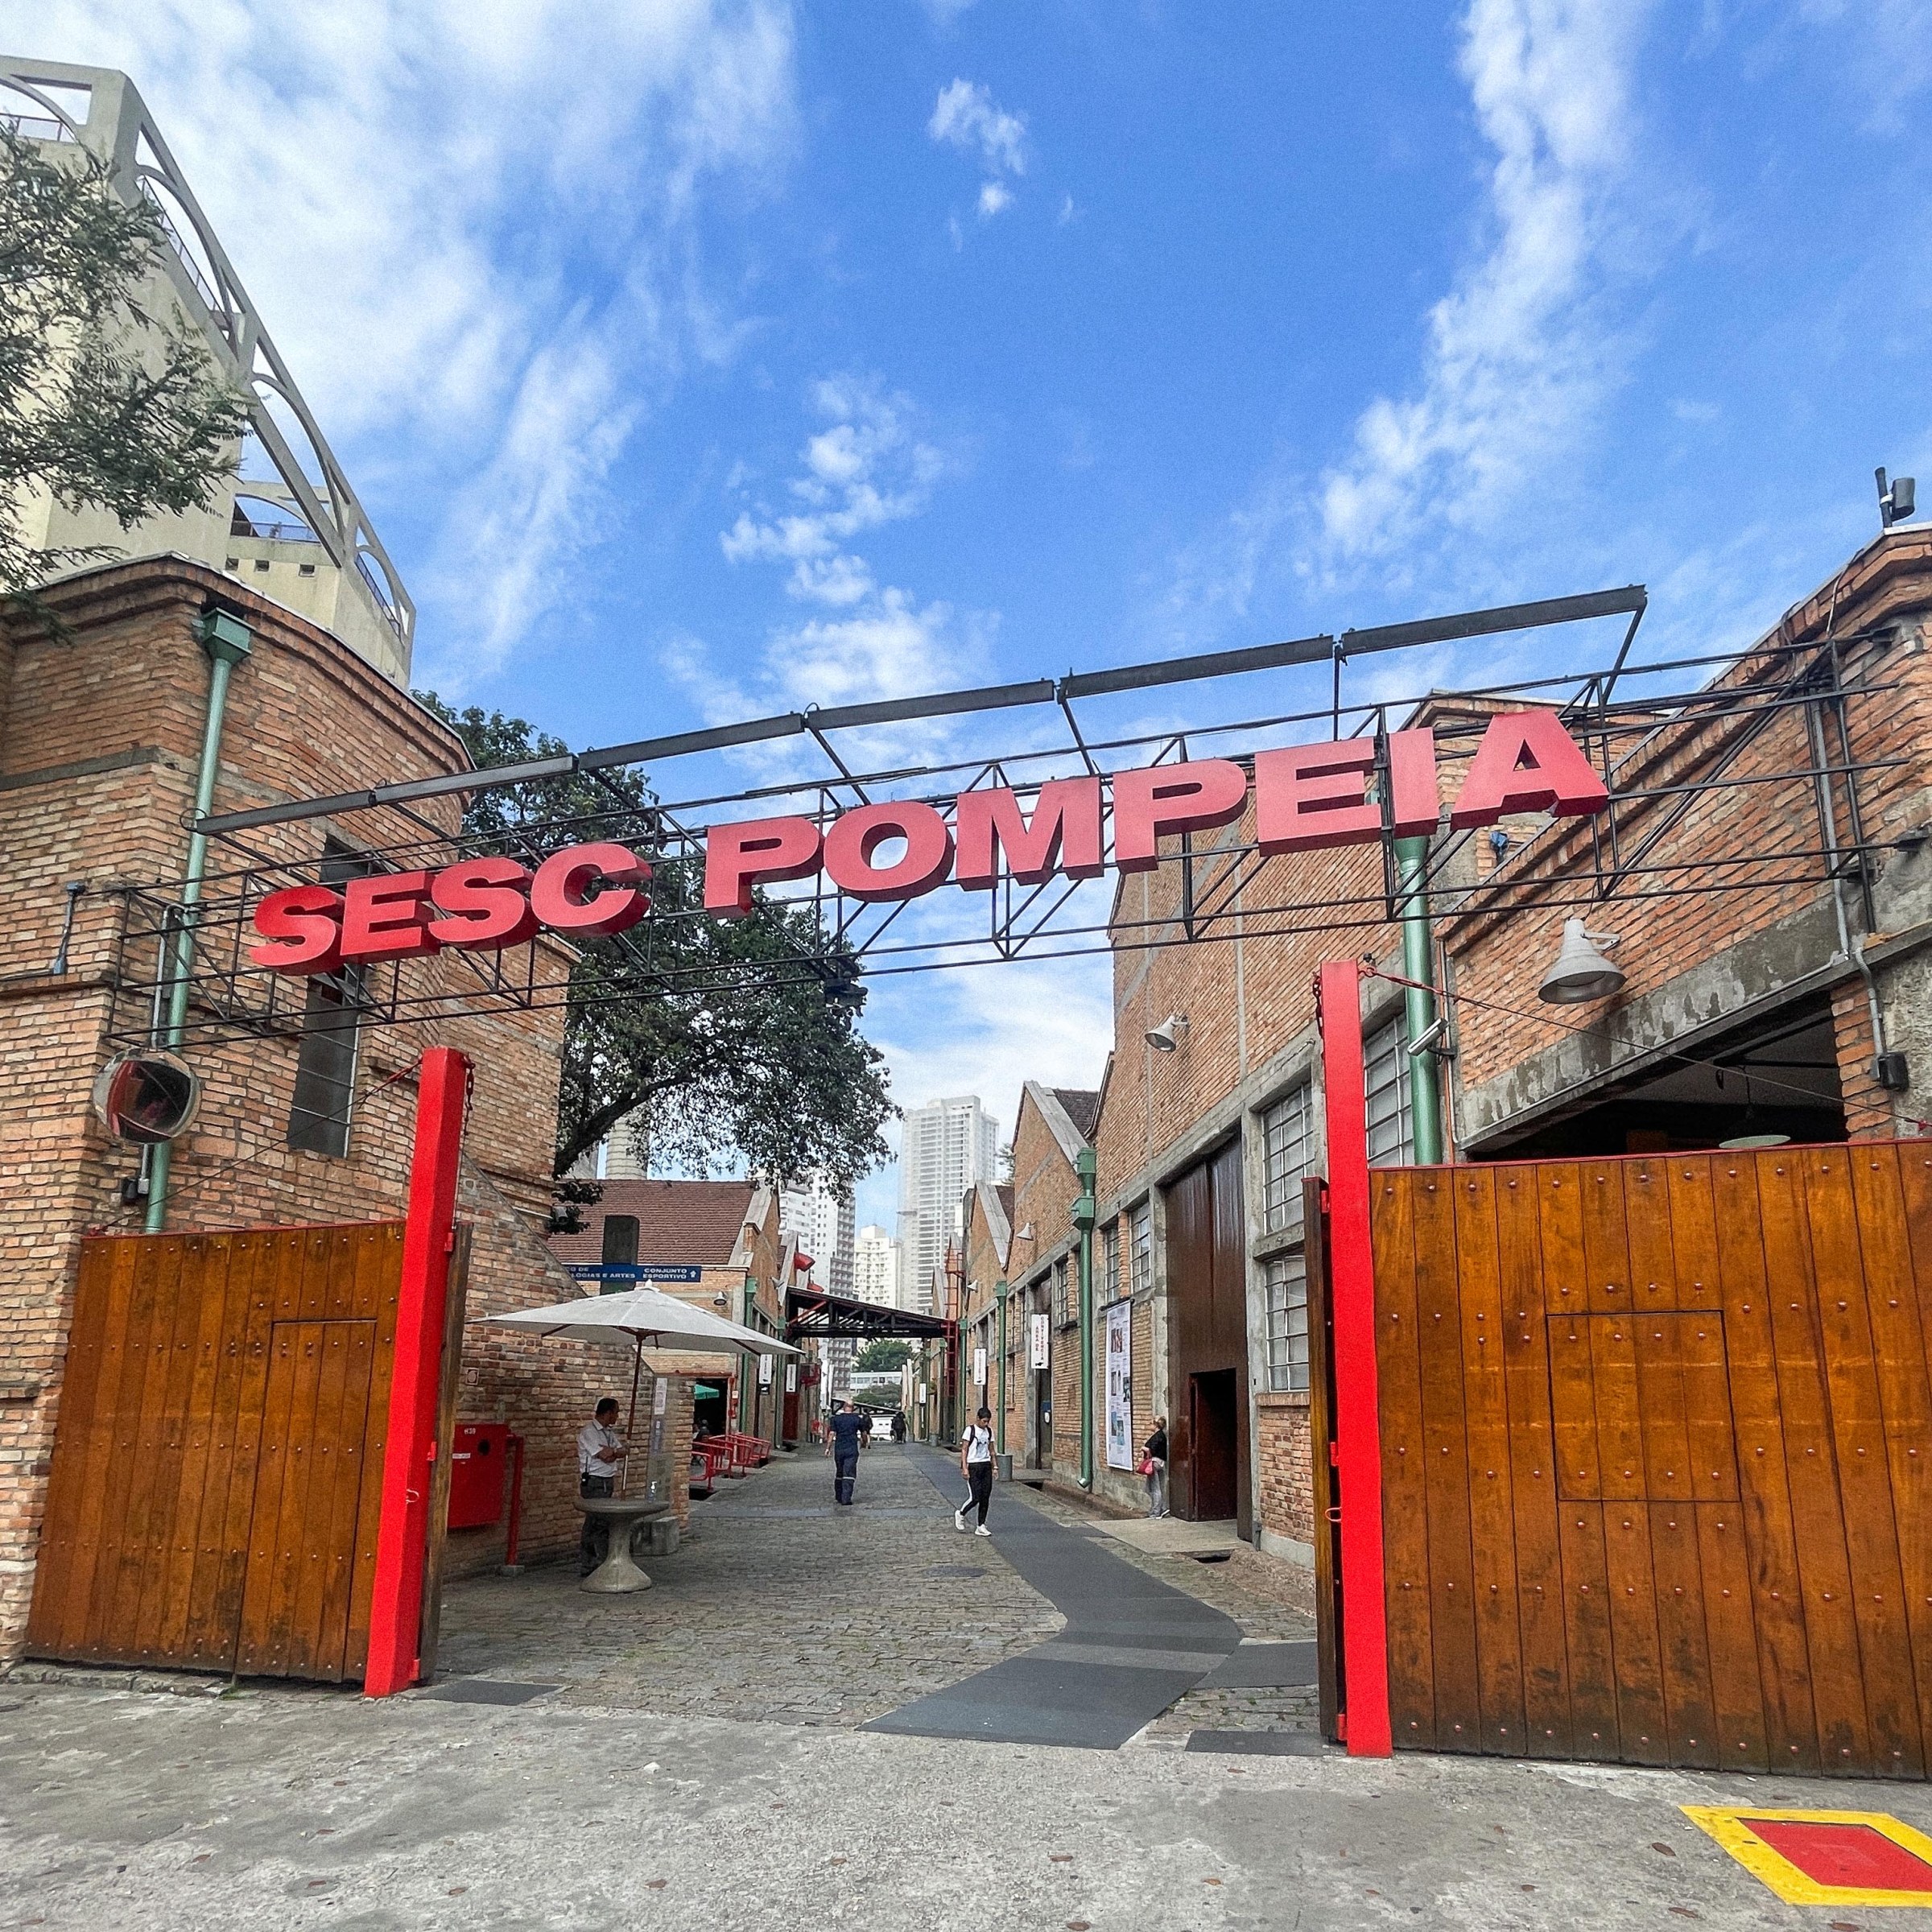 Photo of a entryway to a pedestrian path in a urbanized area with the words "Sesc Pompeia" above the entrance in Sao Paolo, Brazil.